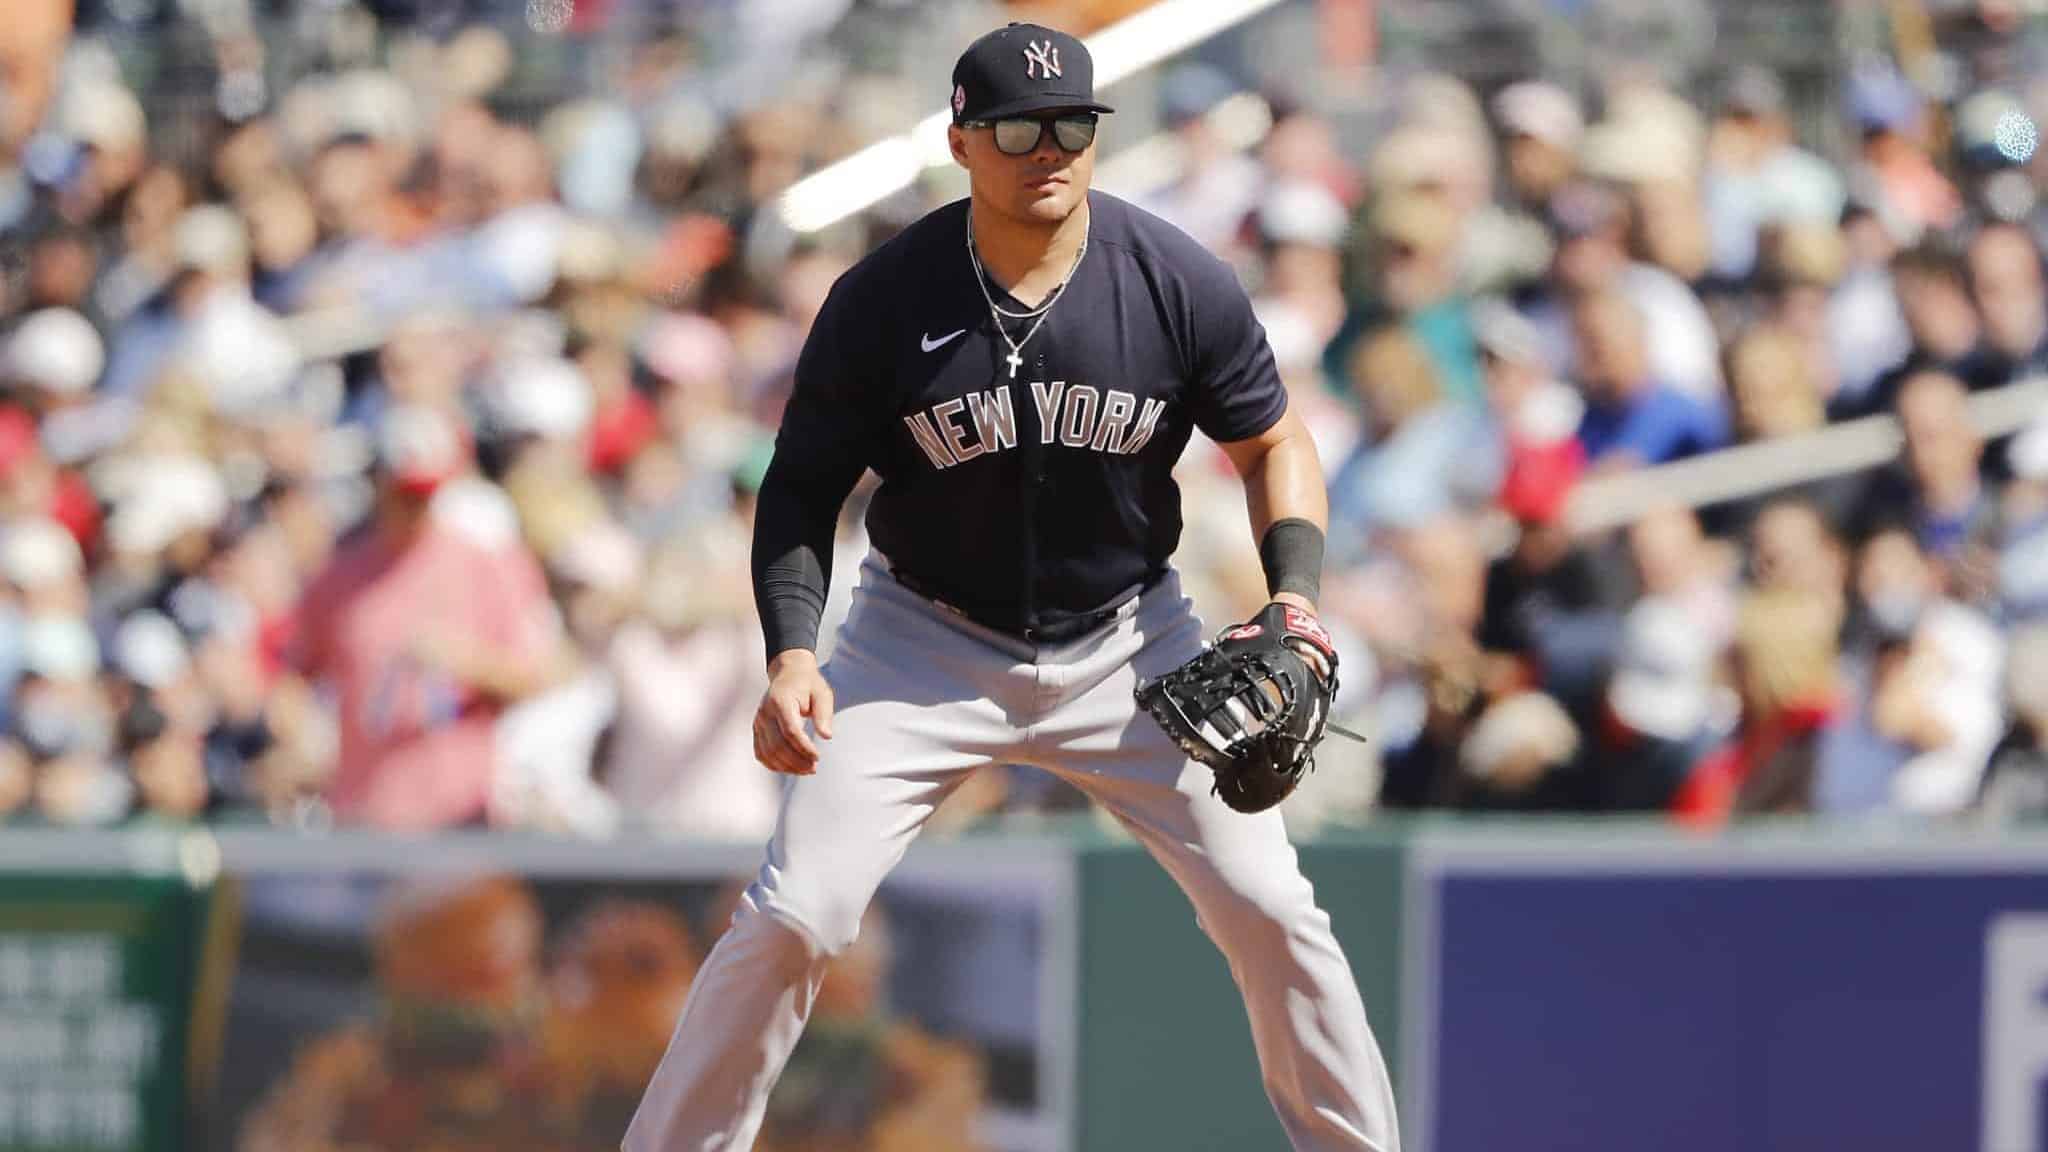 FORT MYERS, FLORIDA - FEBRUARY 29: Luke Voit #59 of the New York Yankees in action against the Boston Red Sox of a Grapefruit League spring training game at JetBlue Park at Fenway South on February 29, 2020 in Fort Myers, Florida.